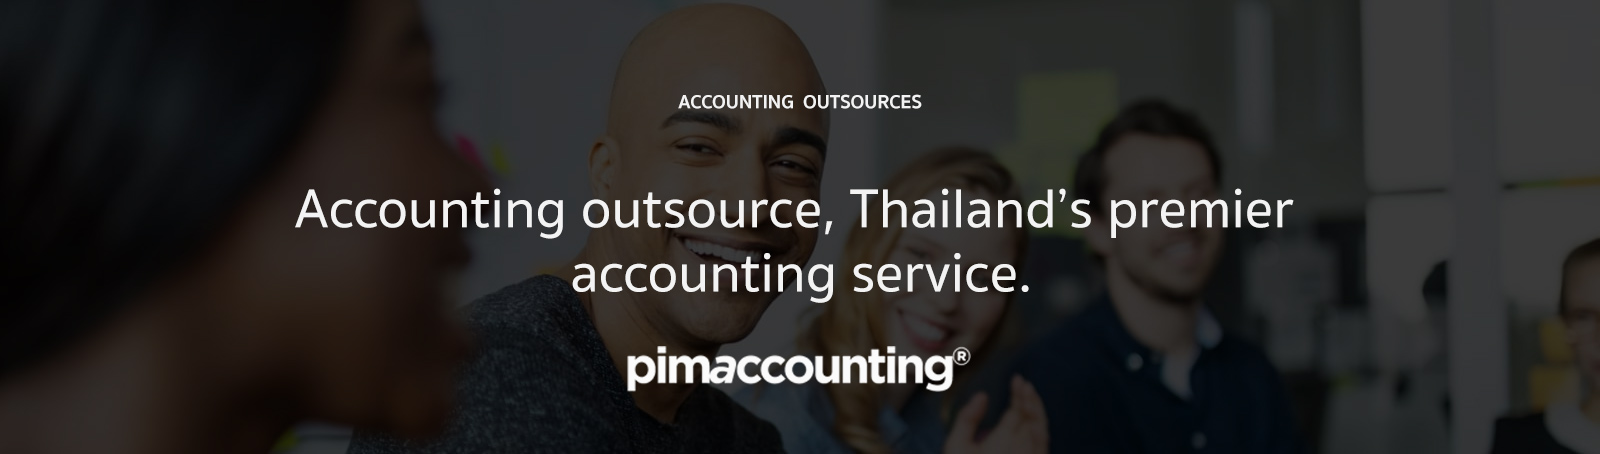 Accounting outsource, Thailand’s premier accounting service.